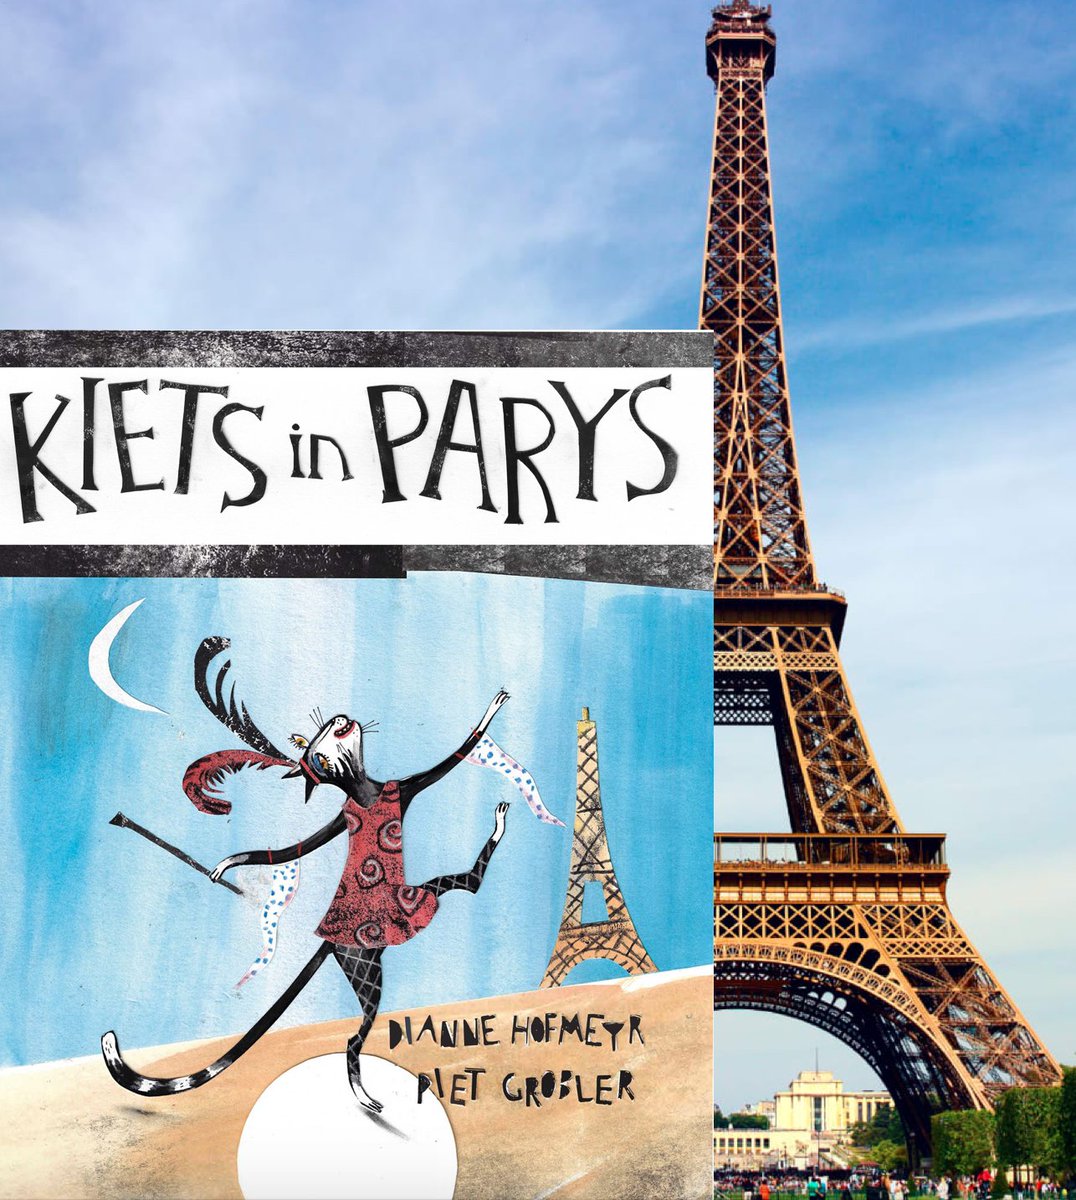 Off to Paris anyone? A bk in a foreign language is something to celebrate! For those who read Afrikaans...  #ParisCat is dancing her way onto bookshelves in S Africa with @lapabooks @castiewalsh @TinyOwl_Books #Pietgrobler @DalyNiki @dhofmeyr @TopspinPro Great Title! Thank you!